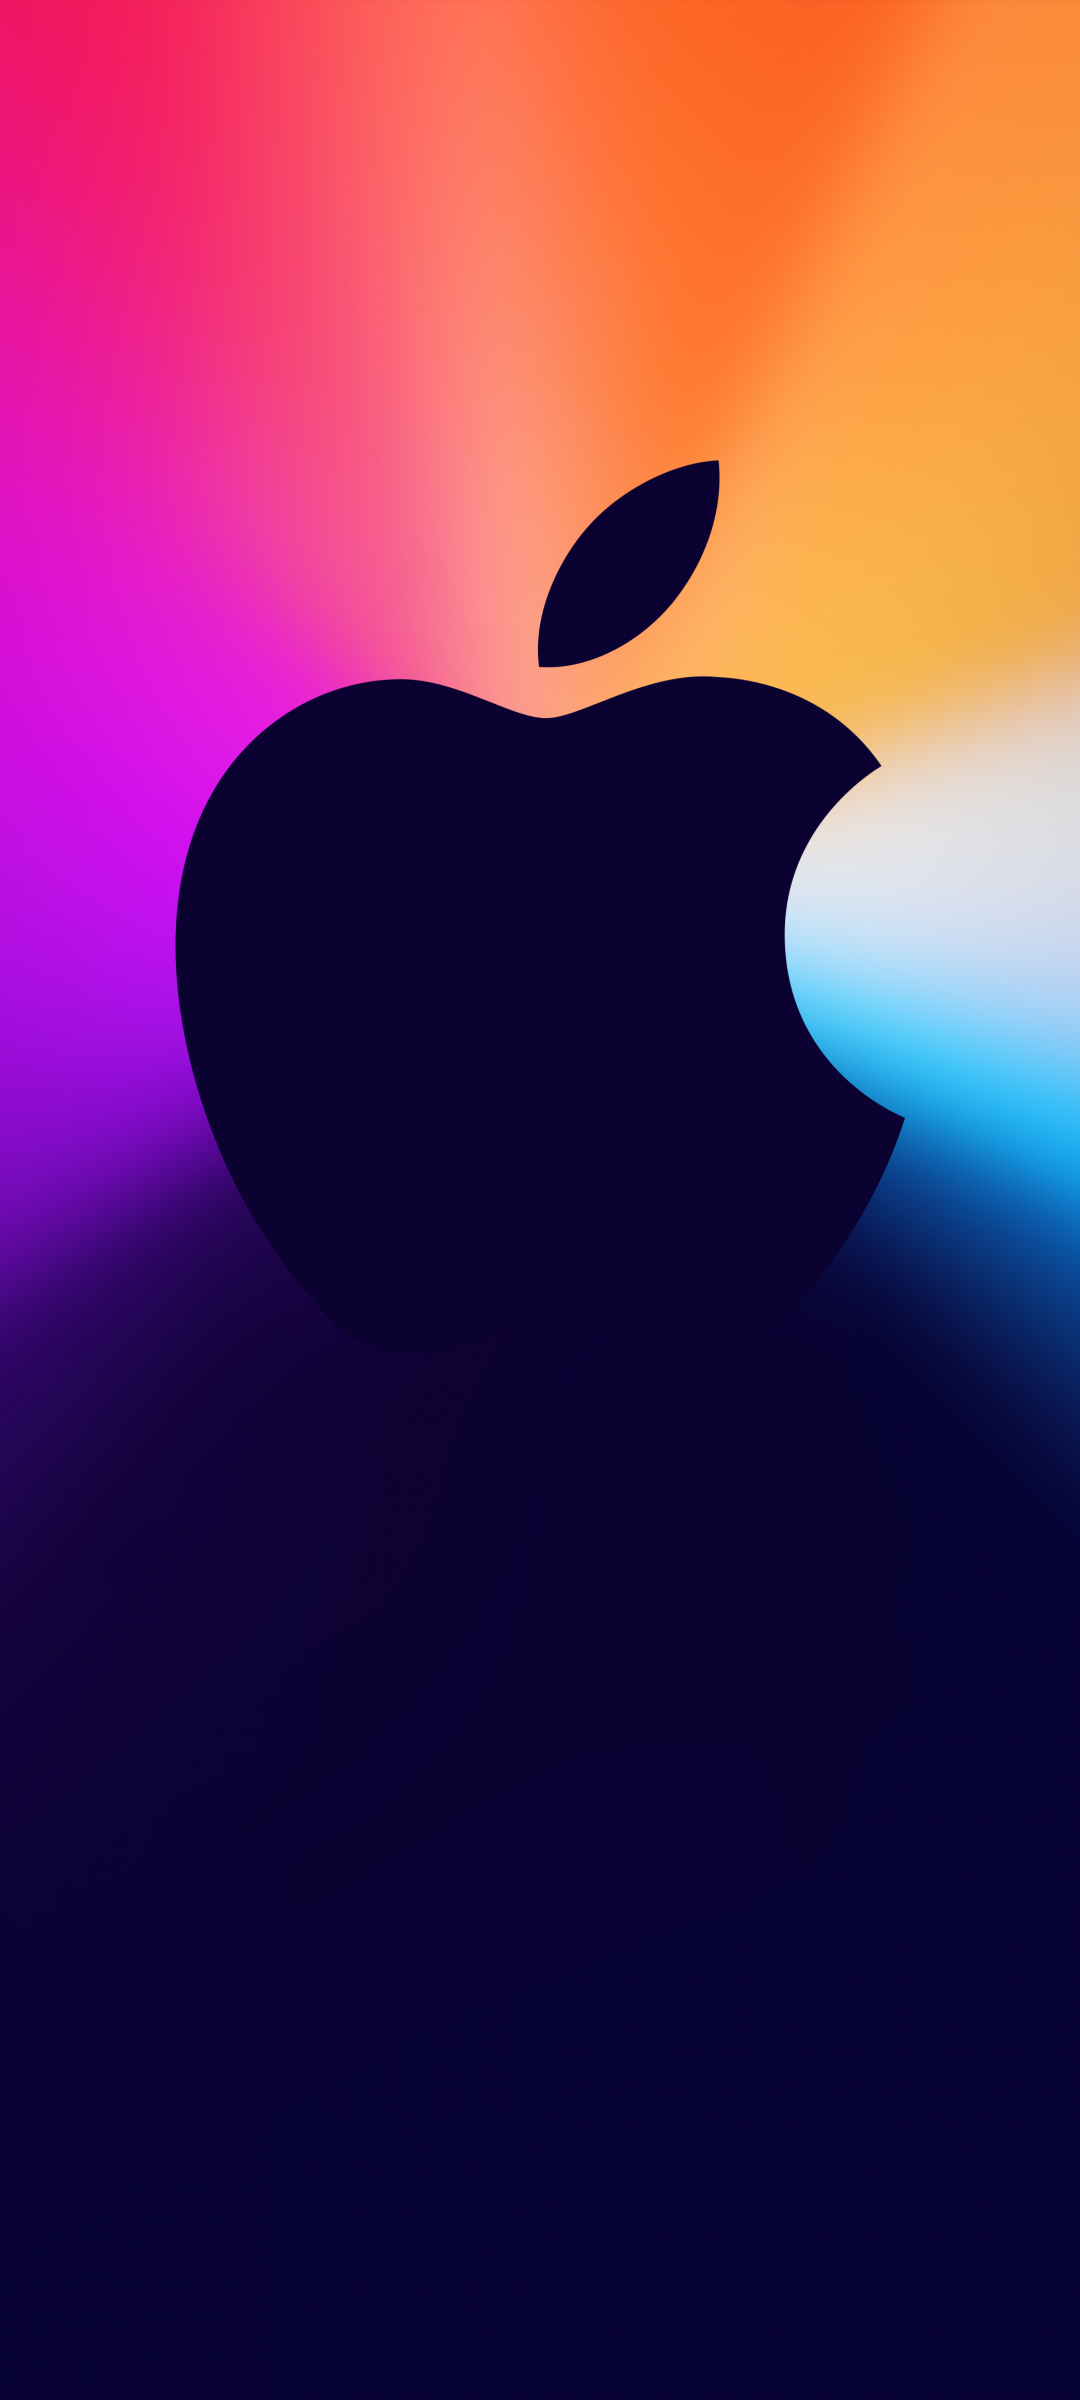 One more thing Wallpaper 4K, Apple logo, Gradient background